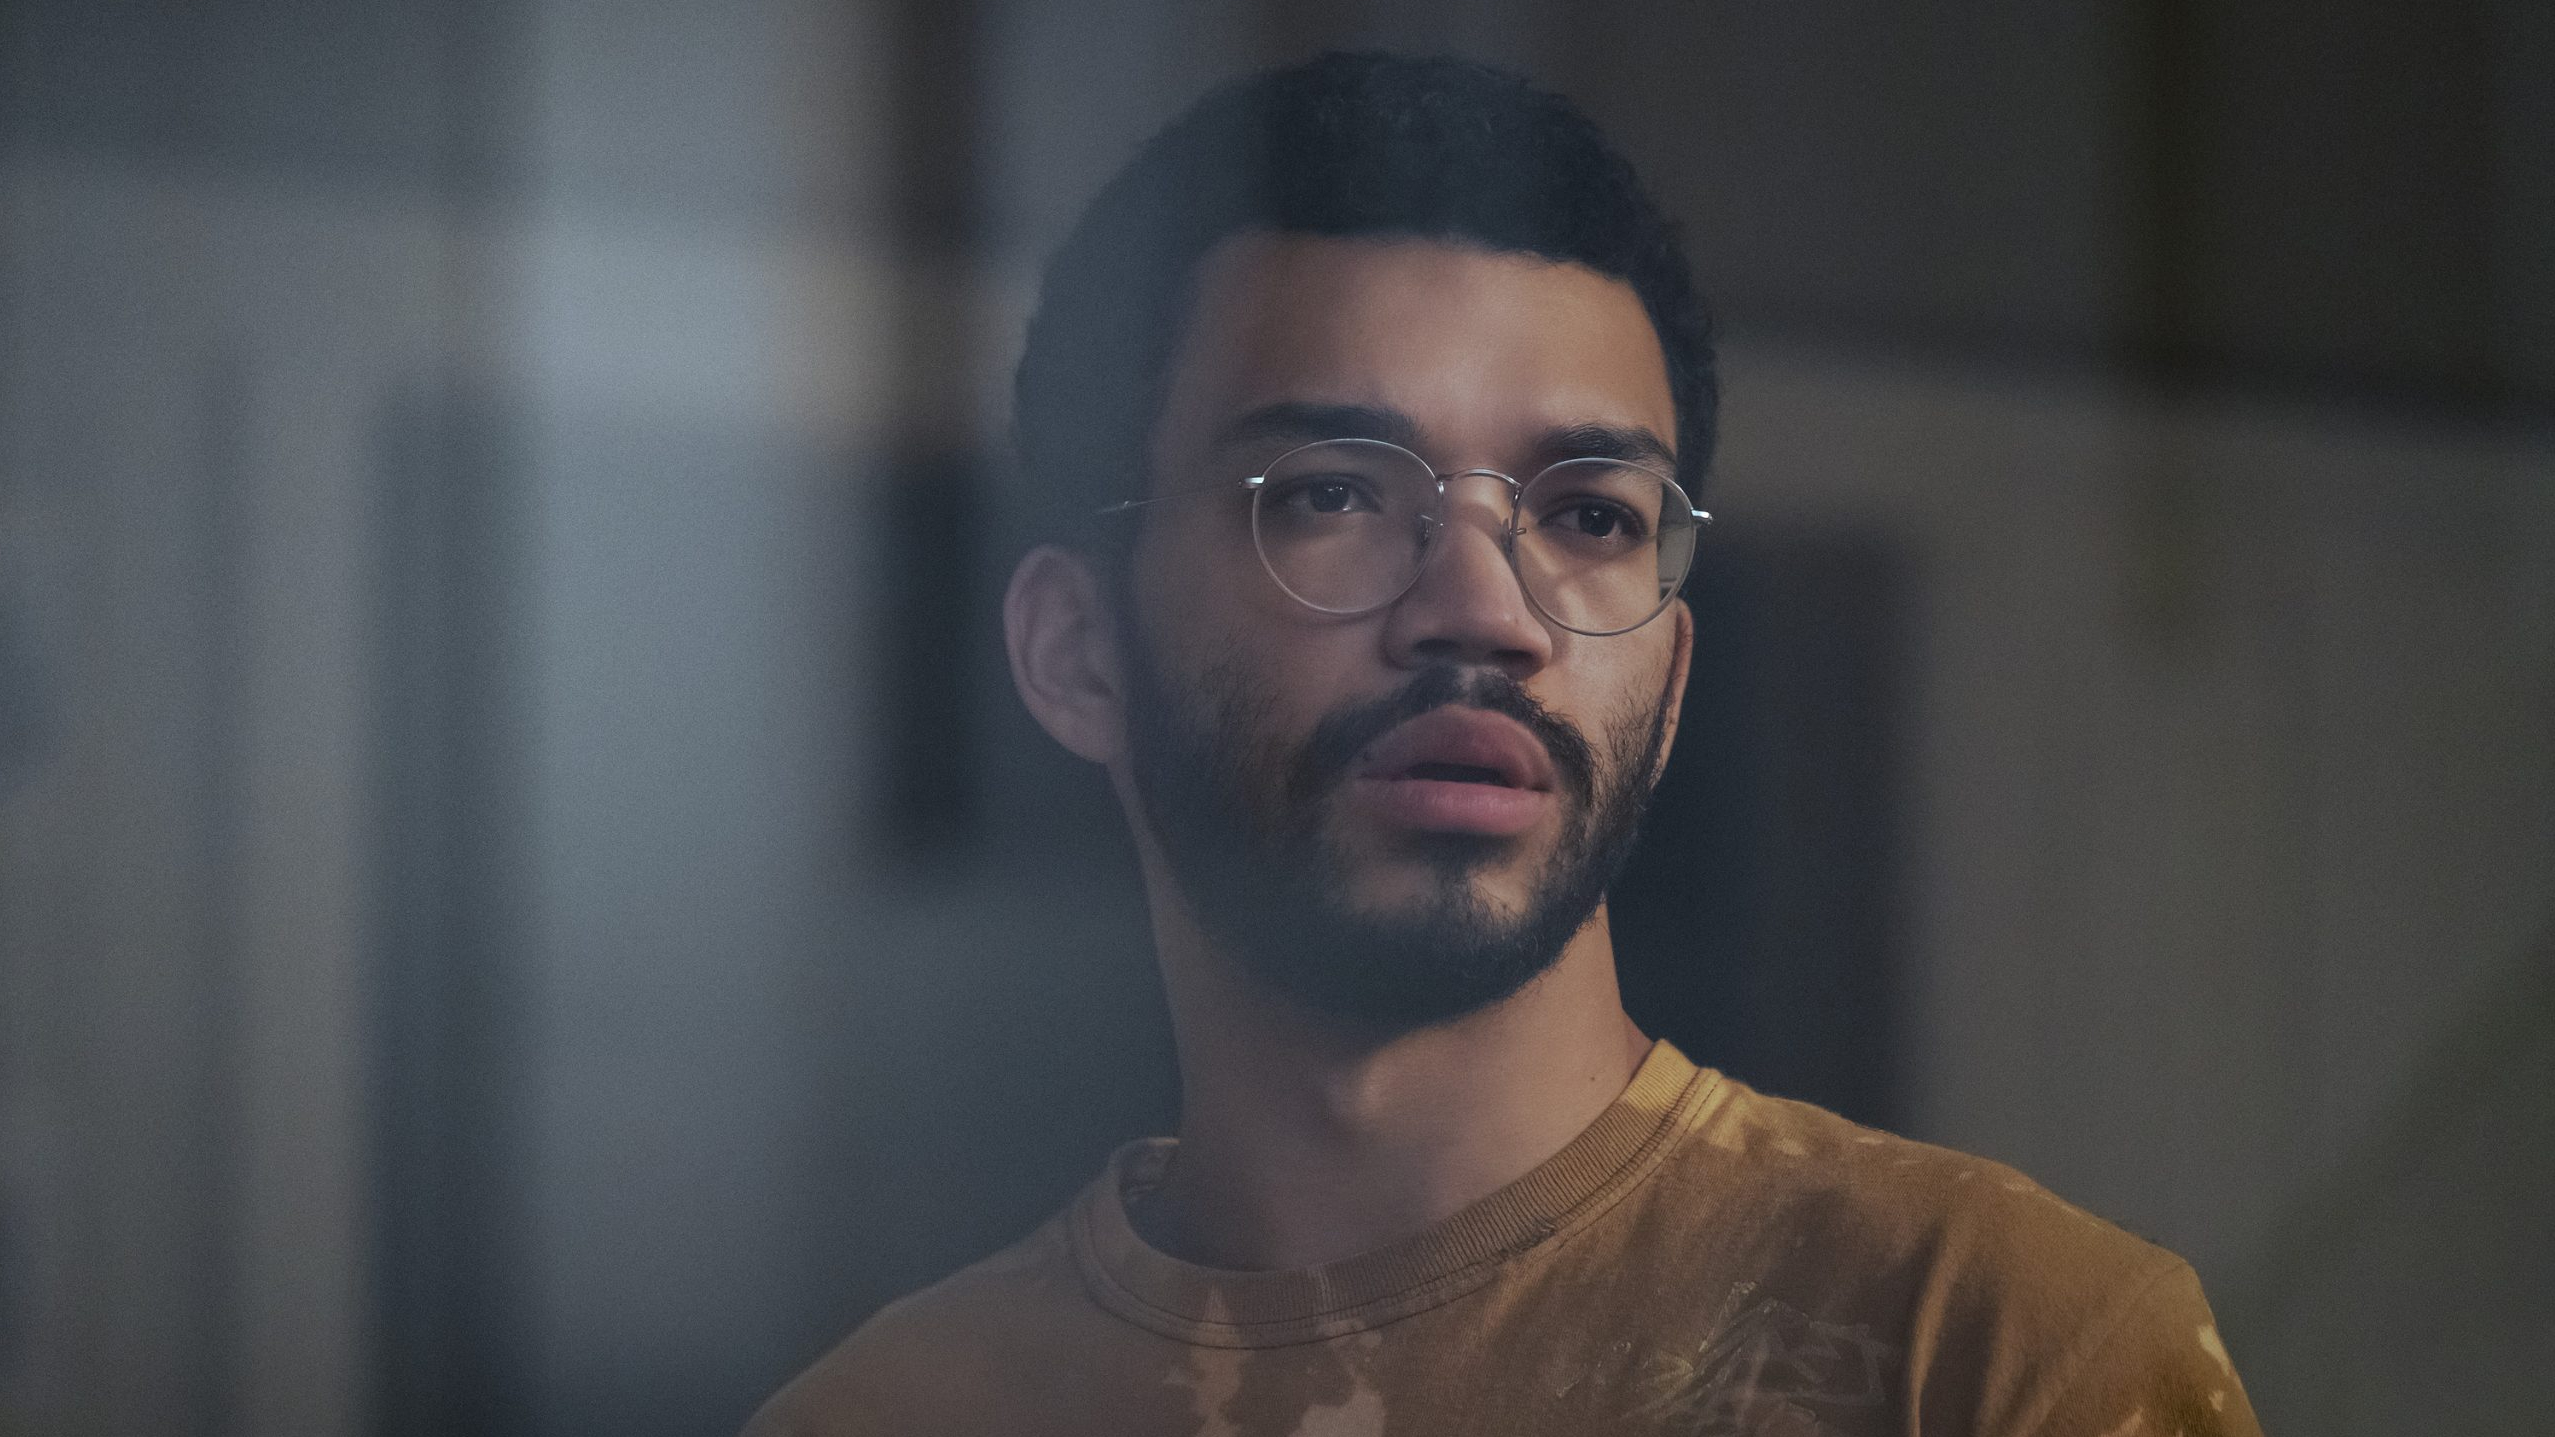 Justice Smith on The Voyeurs and pic